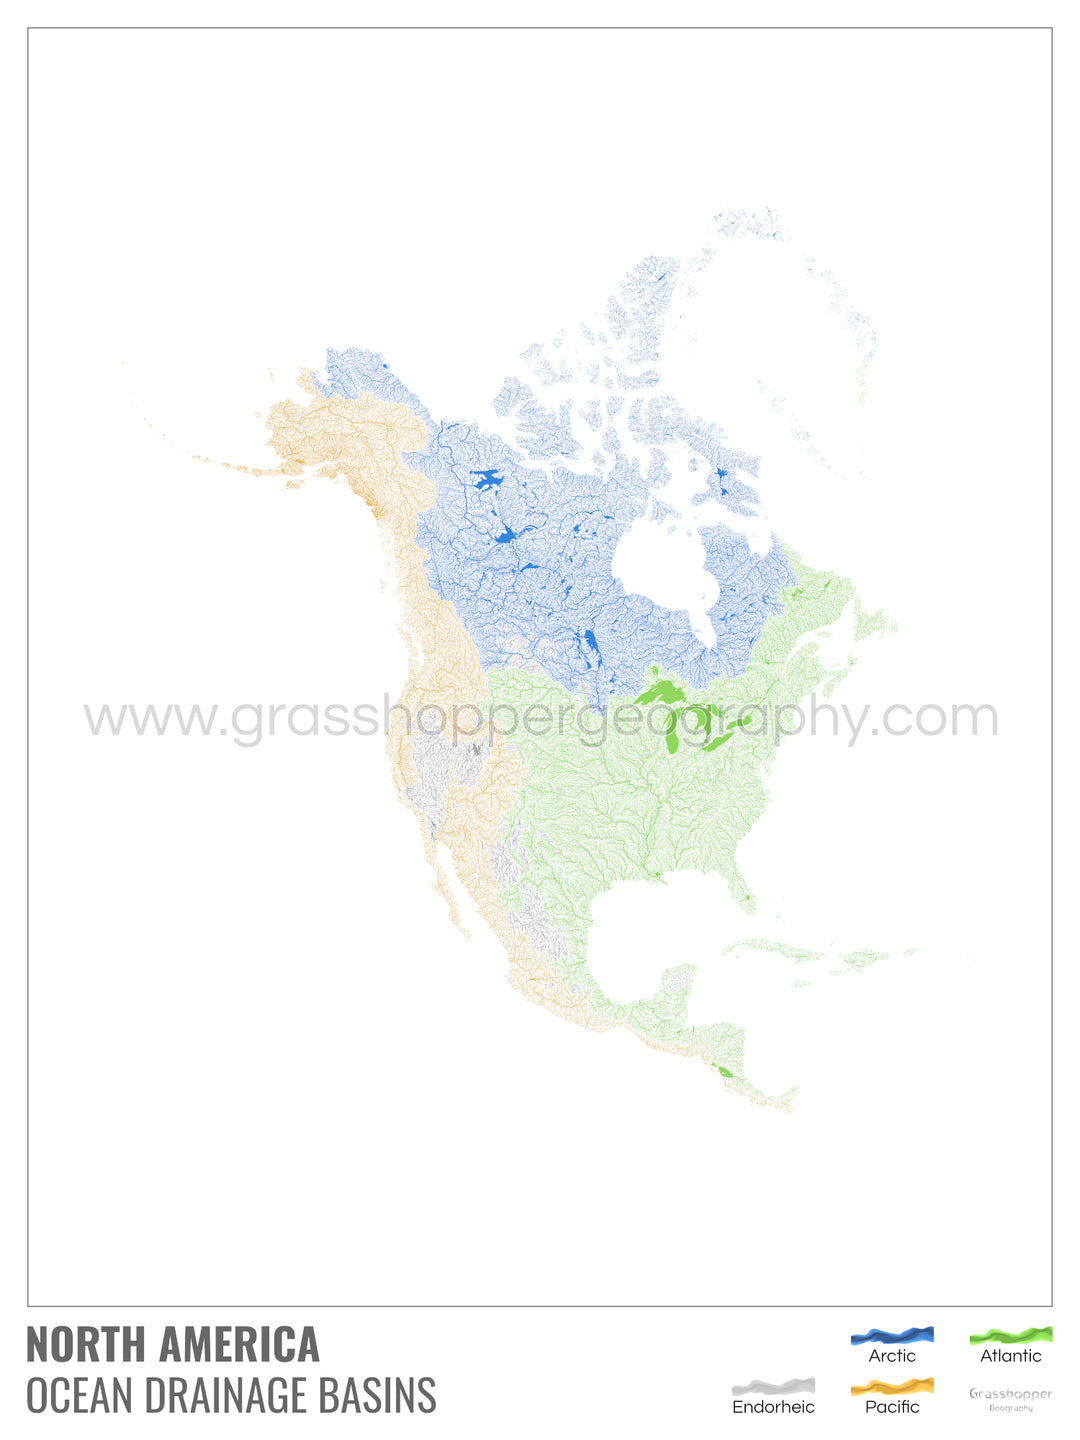 North America - Ocean drainage basin map, white with legend v1 - Framed Print